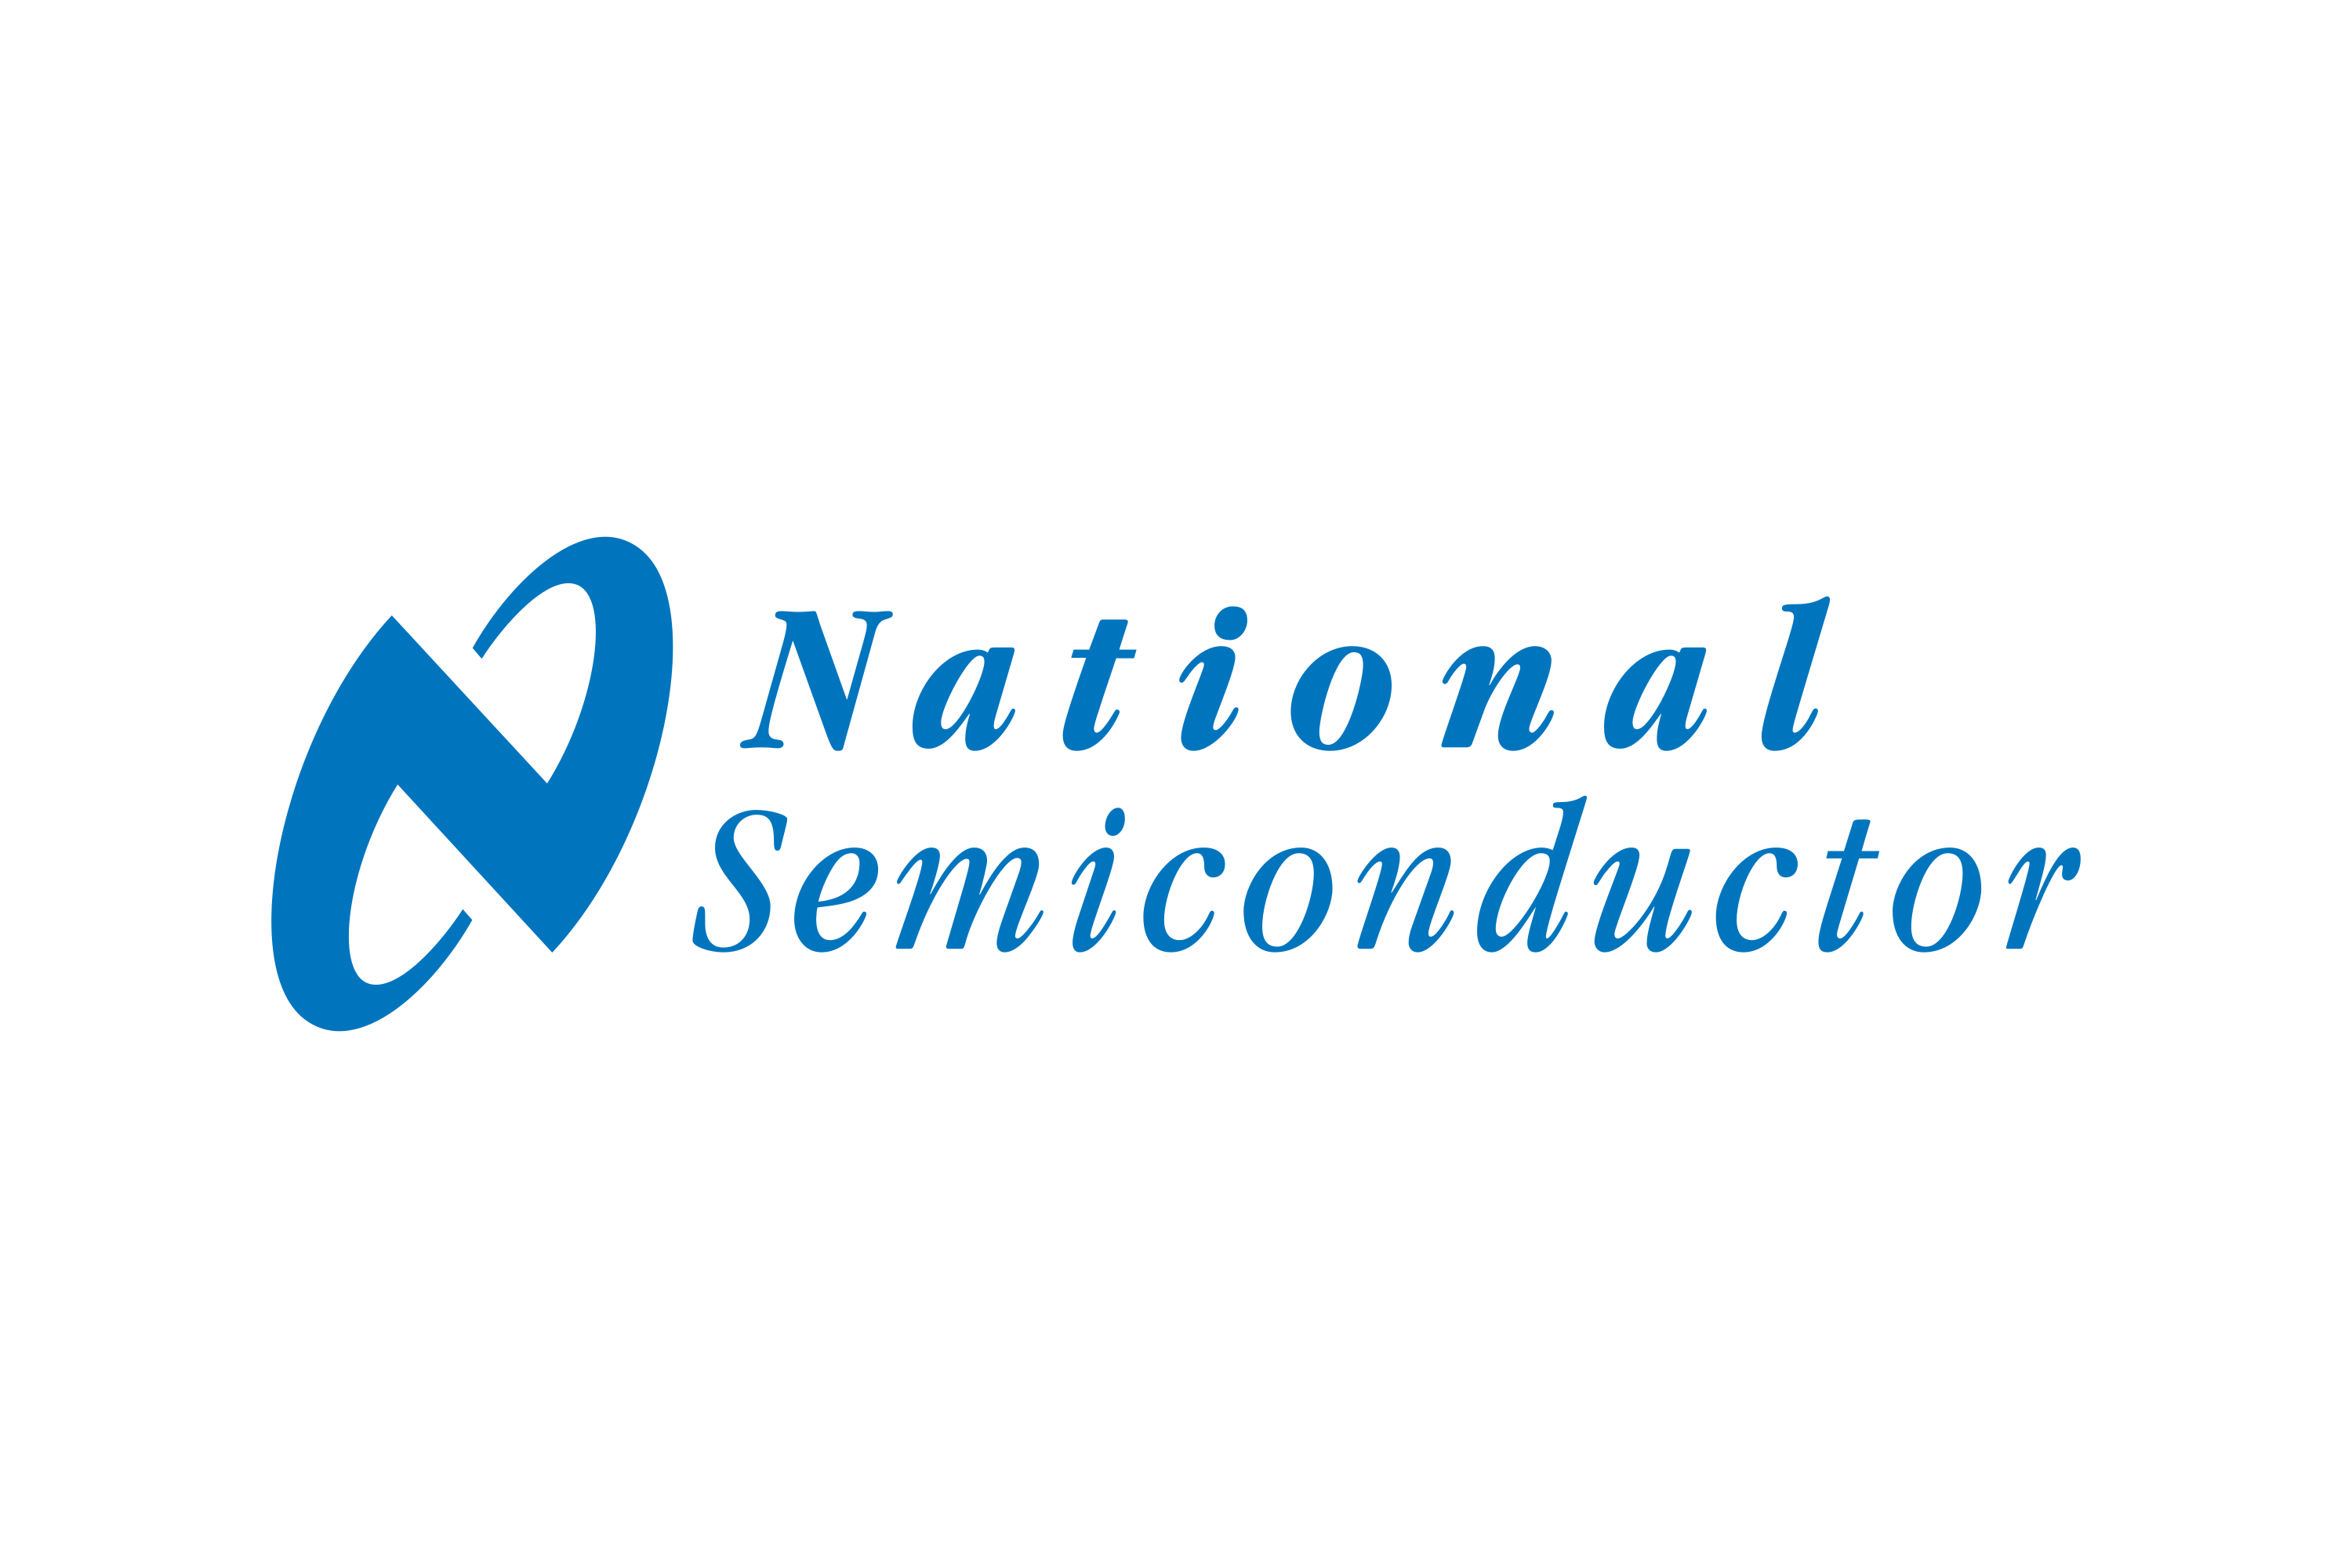 Download National Semiconductor Logo in SVG Vector or PNG File Format